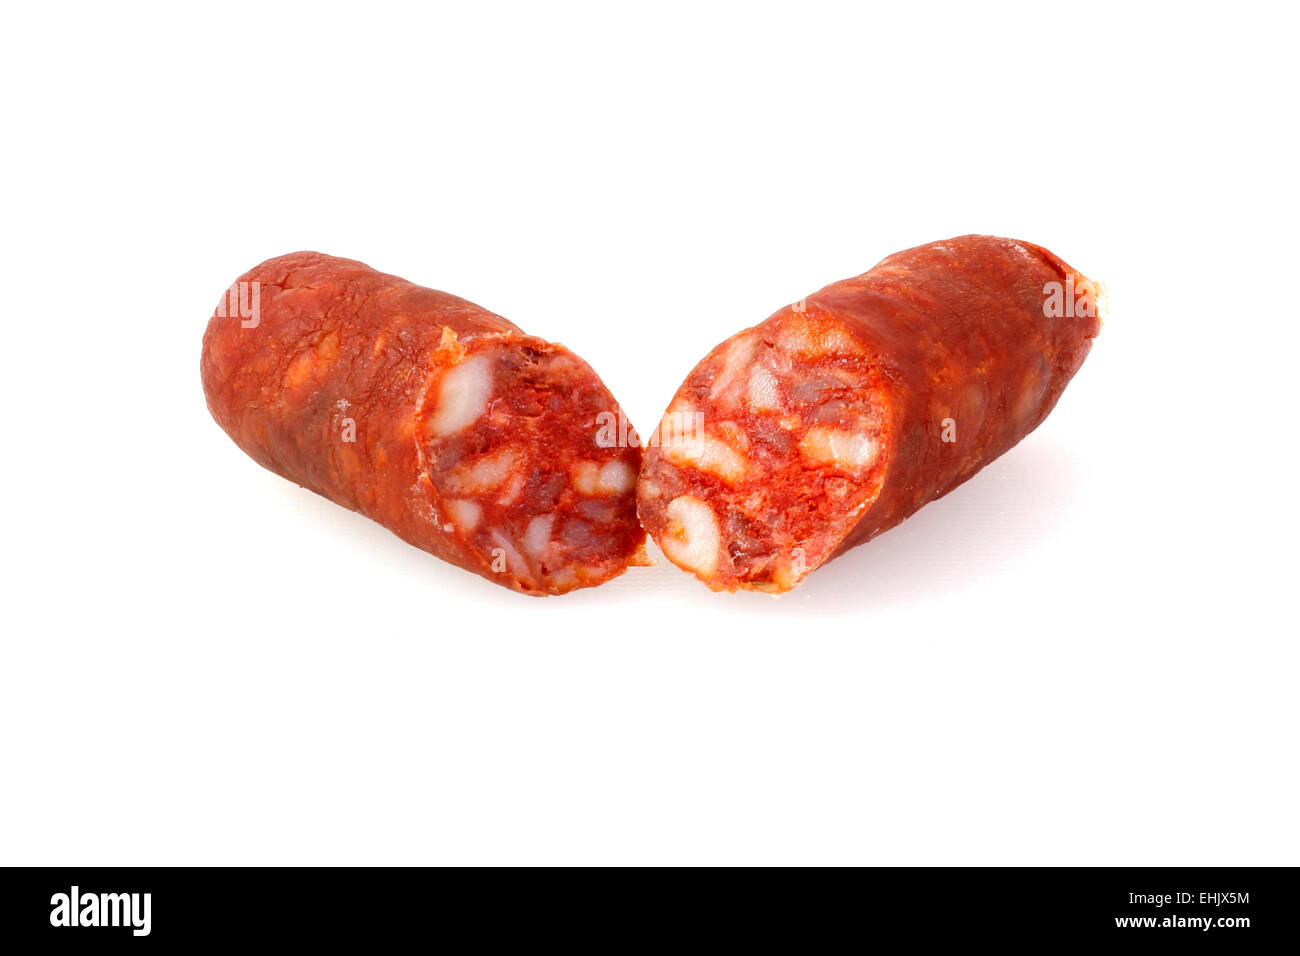 Pork sausage isolated on white food delicious red Stock Photo